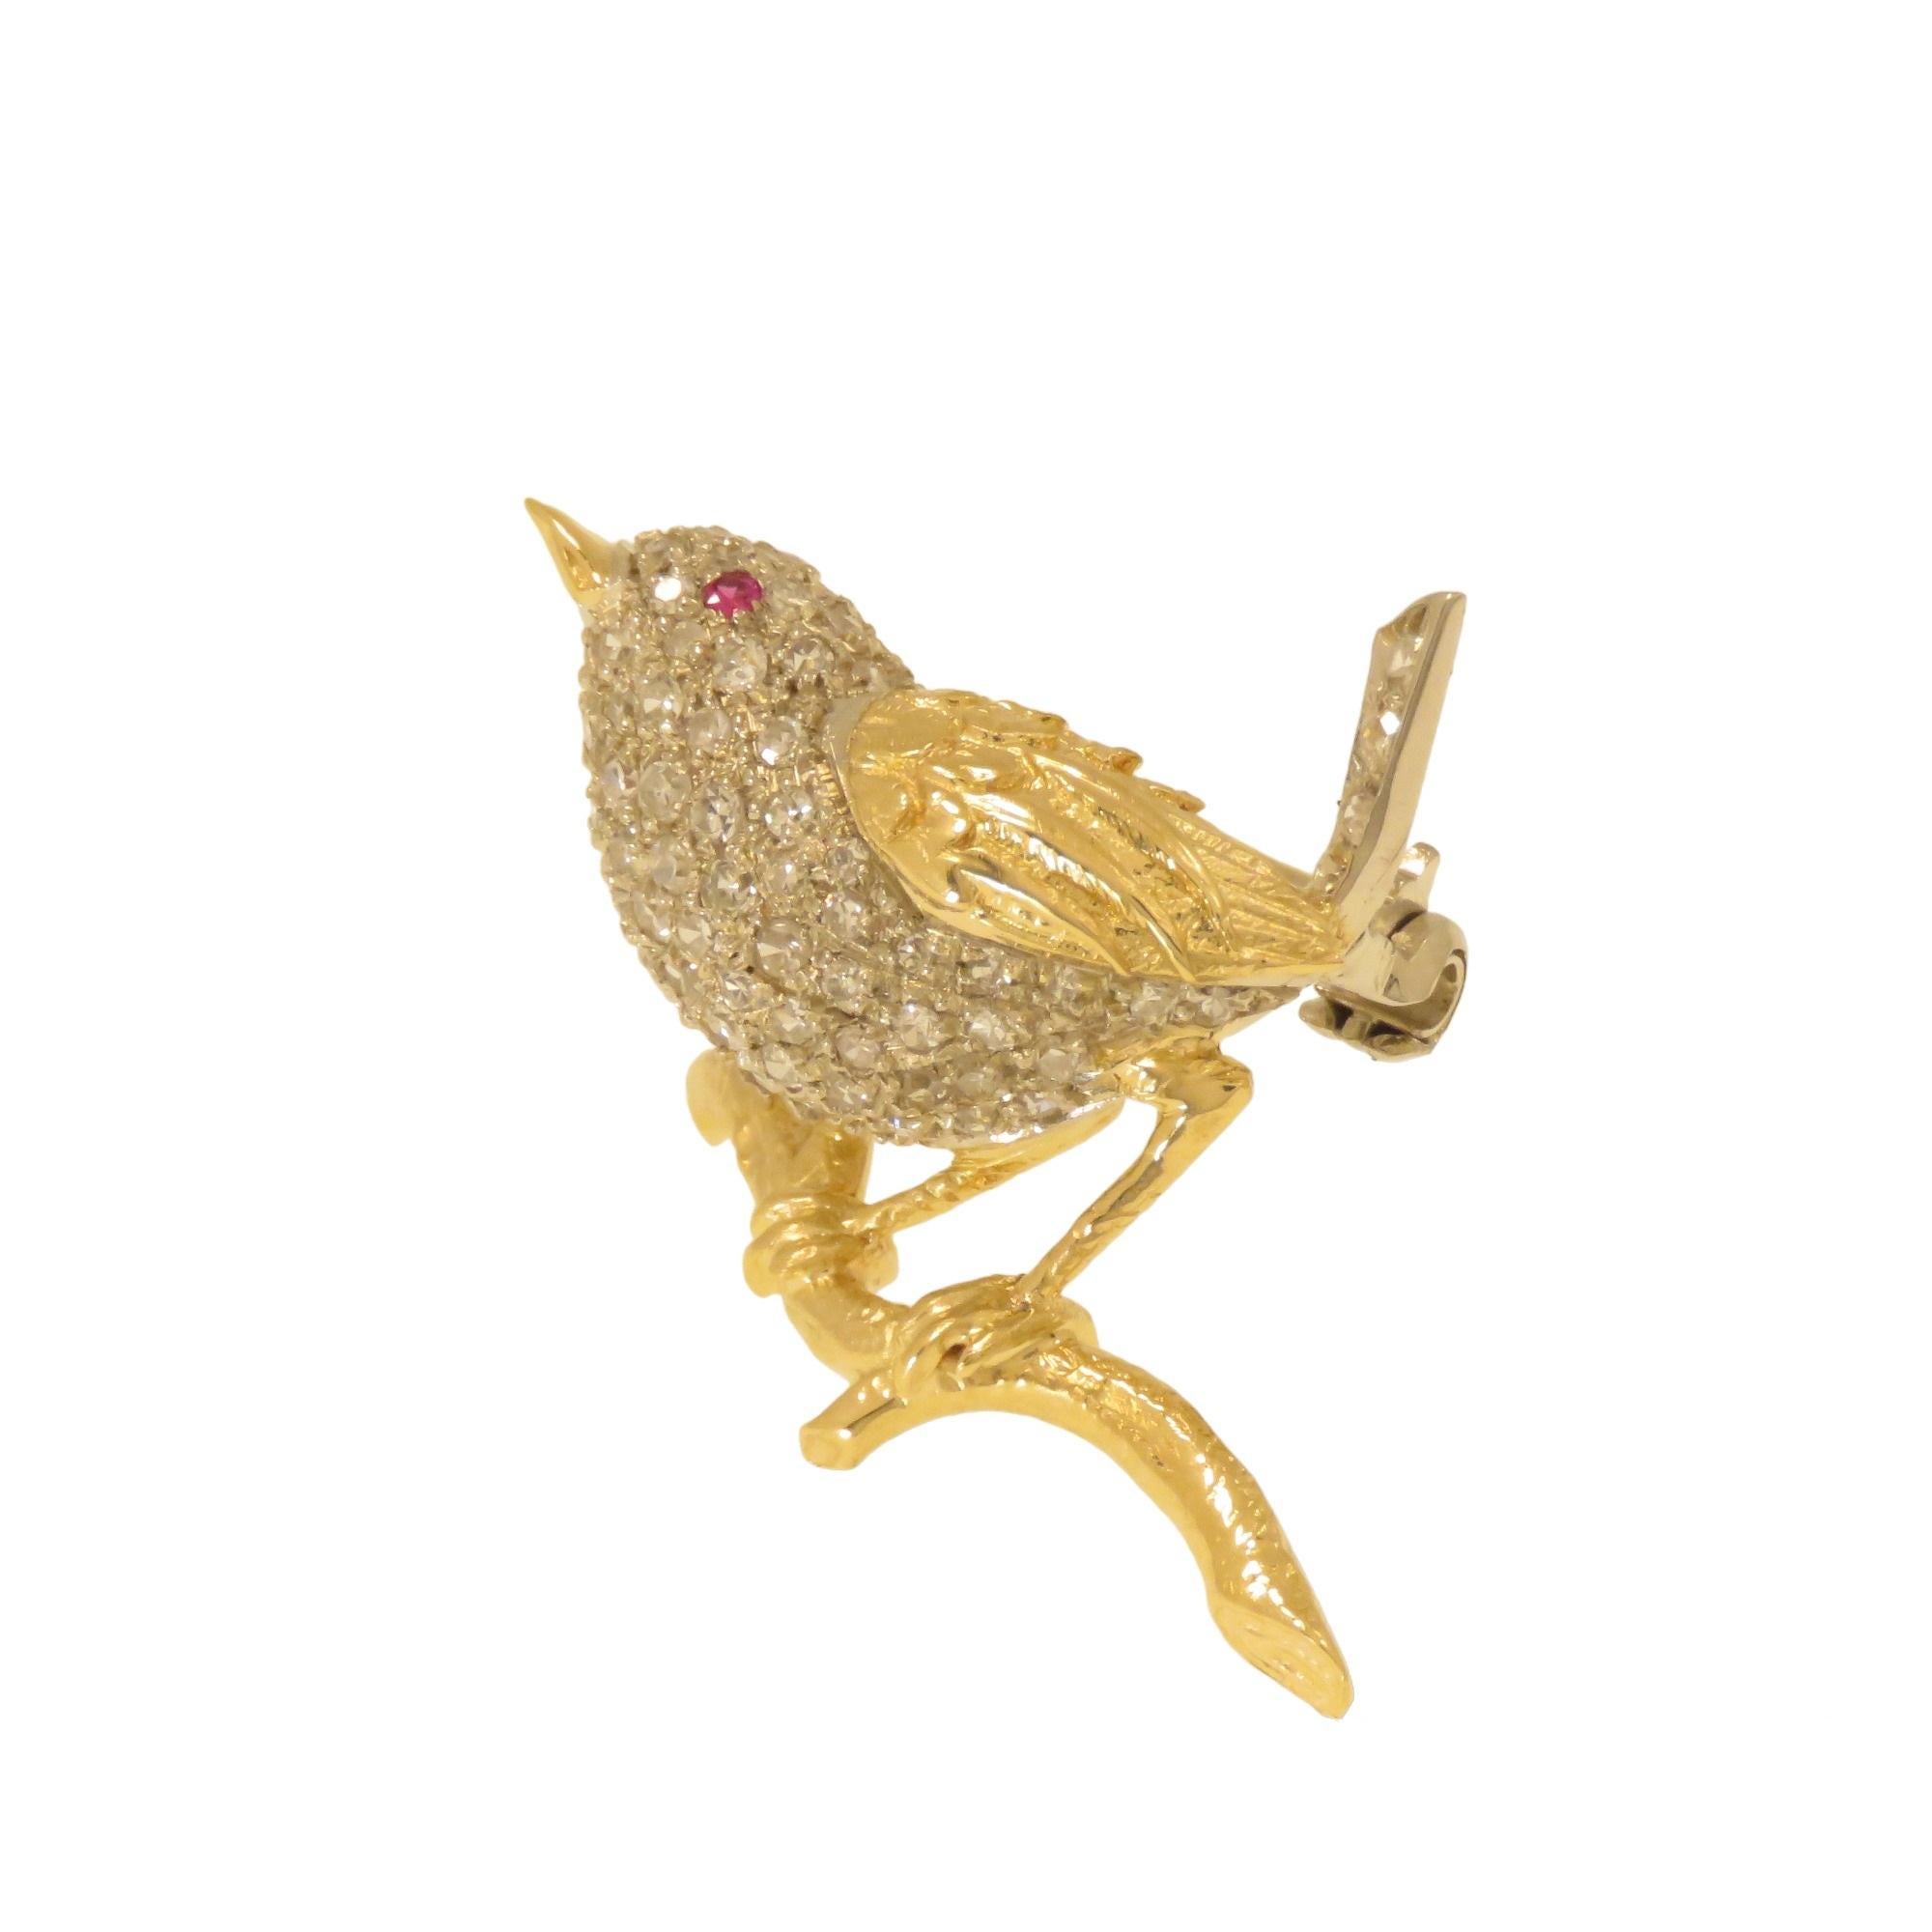 Elegant handcrafted bird-shaped brooch in 18K yellow and white gold with 72 diamonds of approximately 1.4 carats set on the body. The gold parts without diamonds such as the wing, beak, legs, and branch are crafted and finely engraved by hand. 